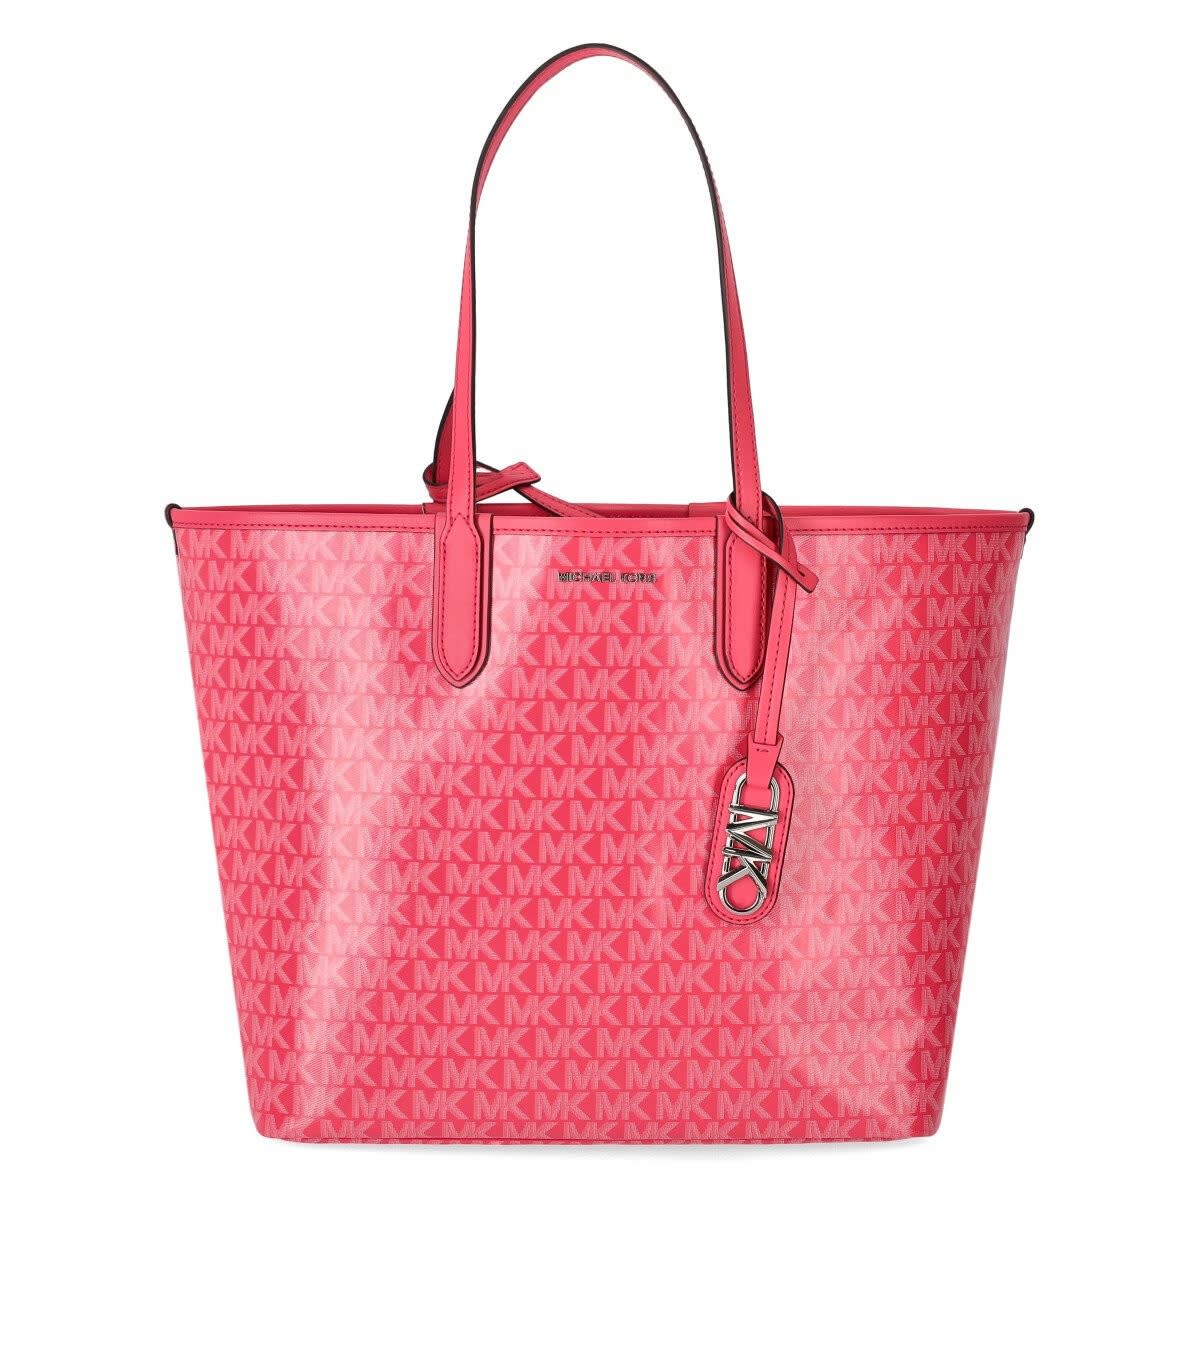 MICHAEL KORS BIG PINK TOTE BAG WITH ALL-OVER MONOGRAM AND LOGO CHARM IN FAUX LEATHER WOMAN